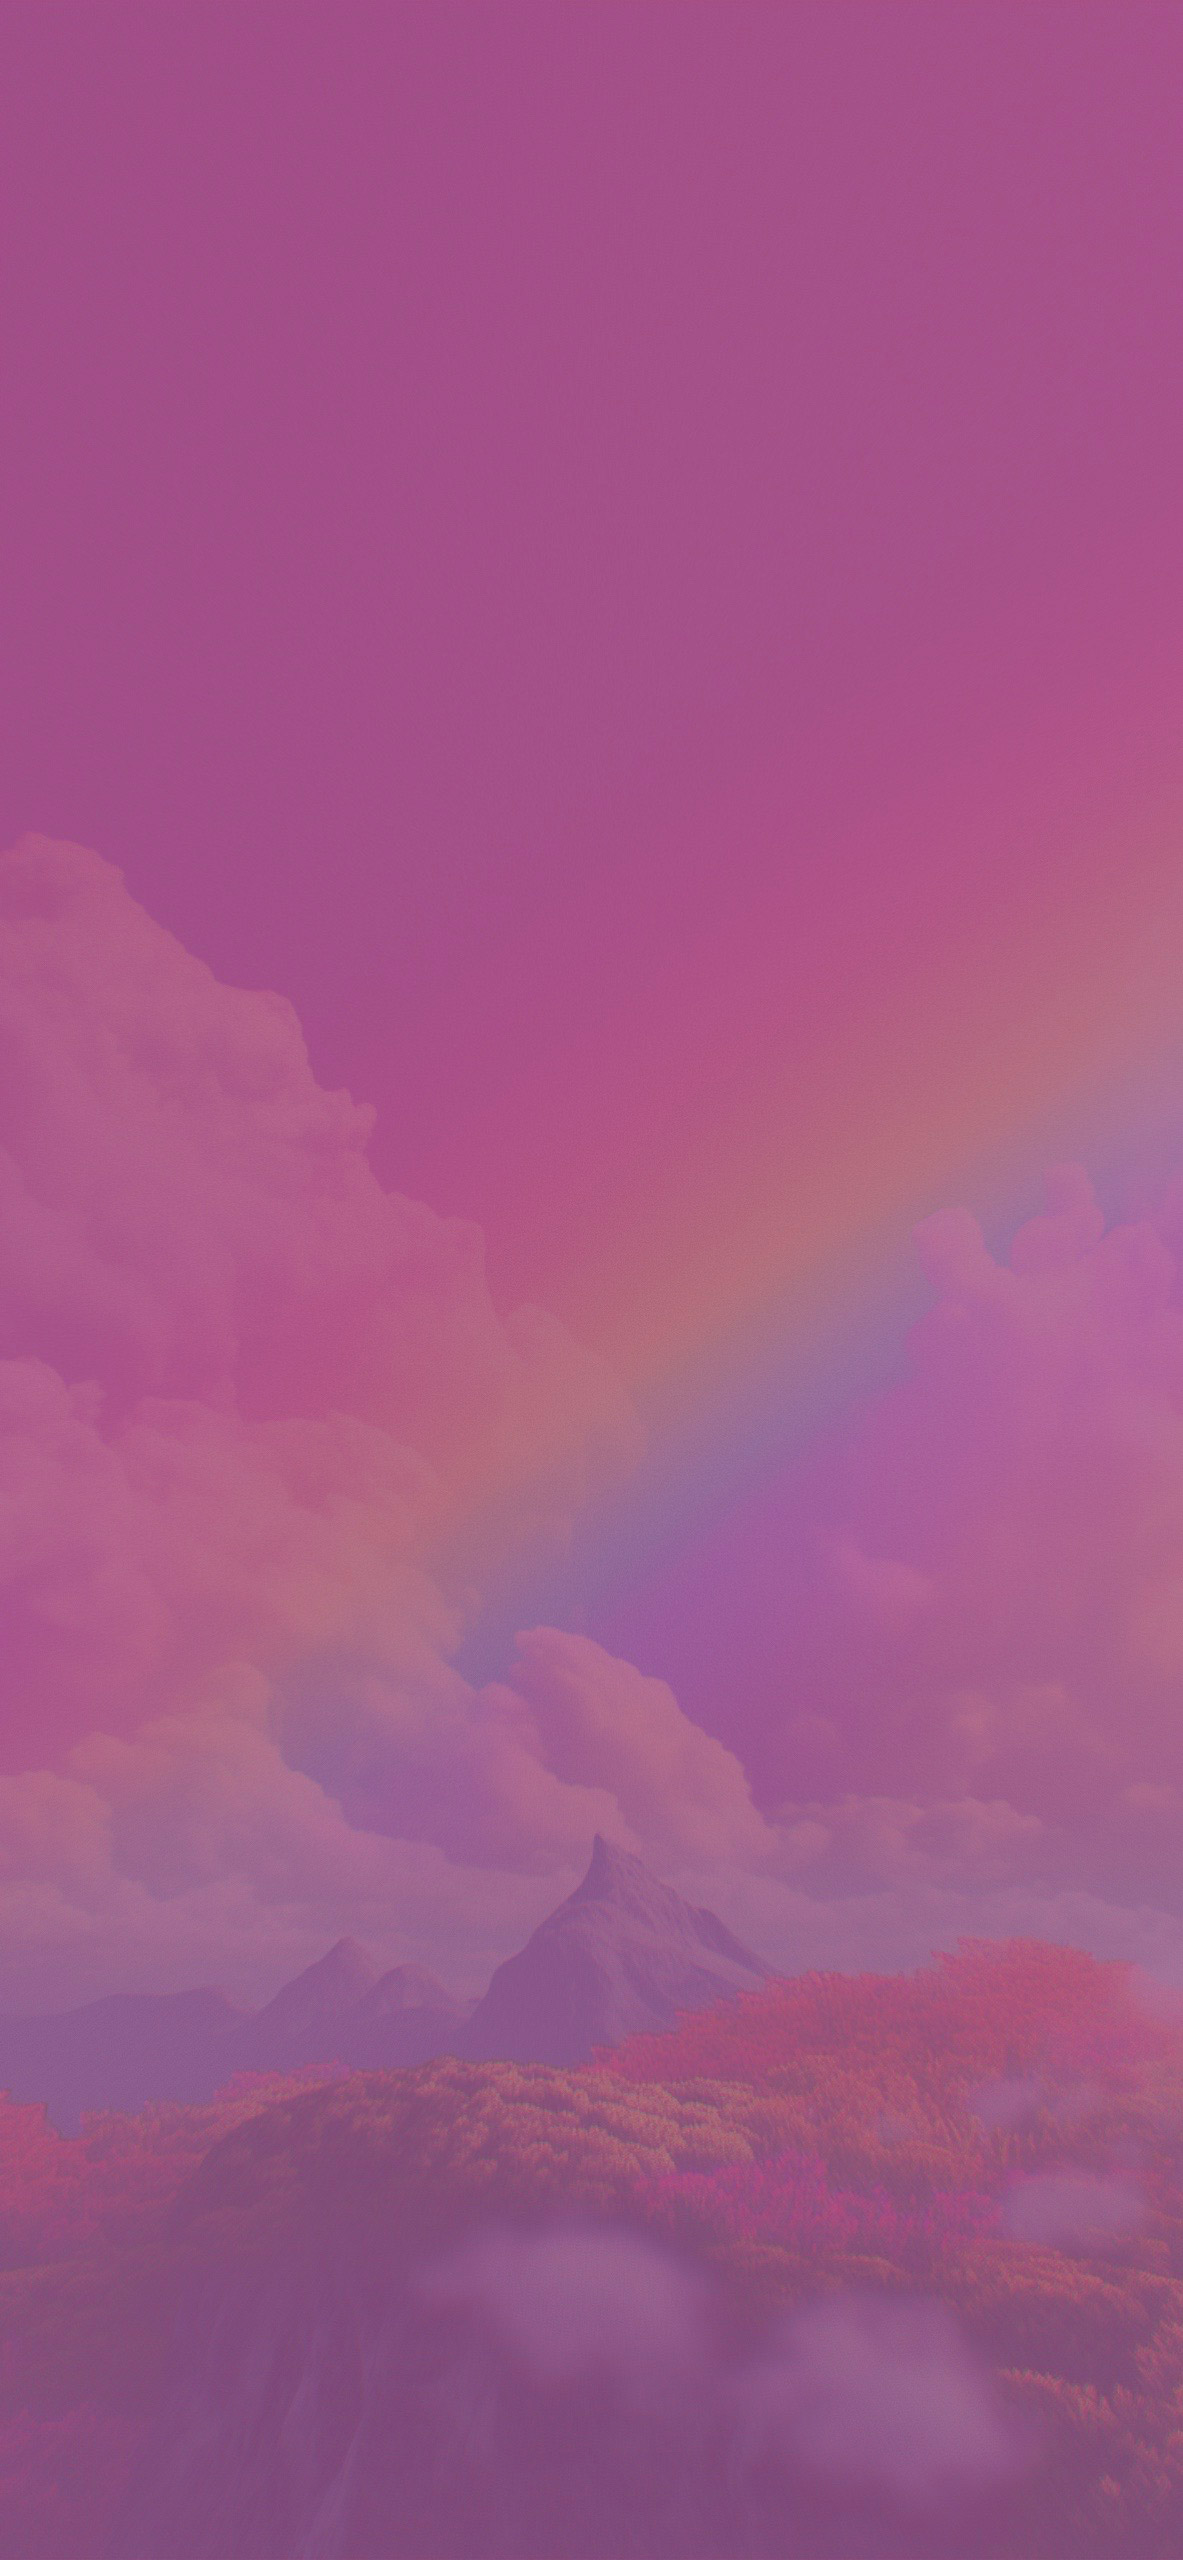 rainbow in pink sky background